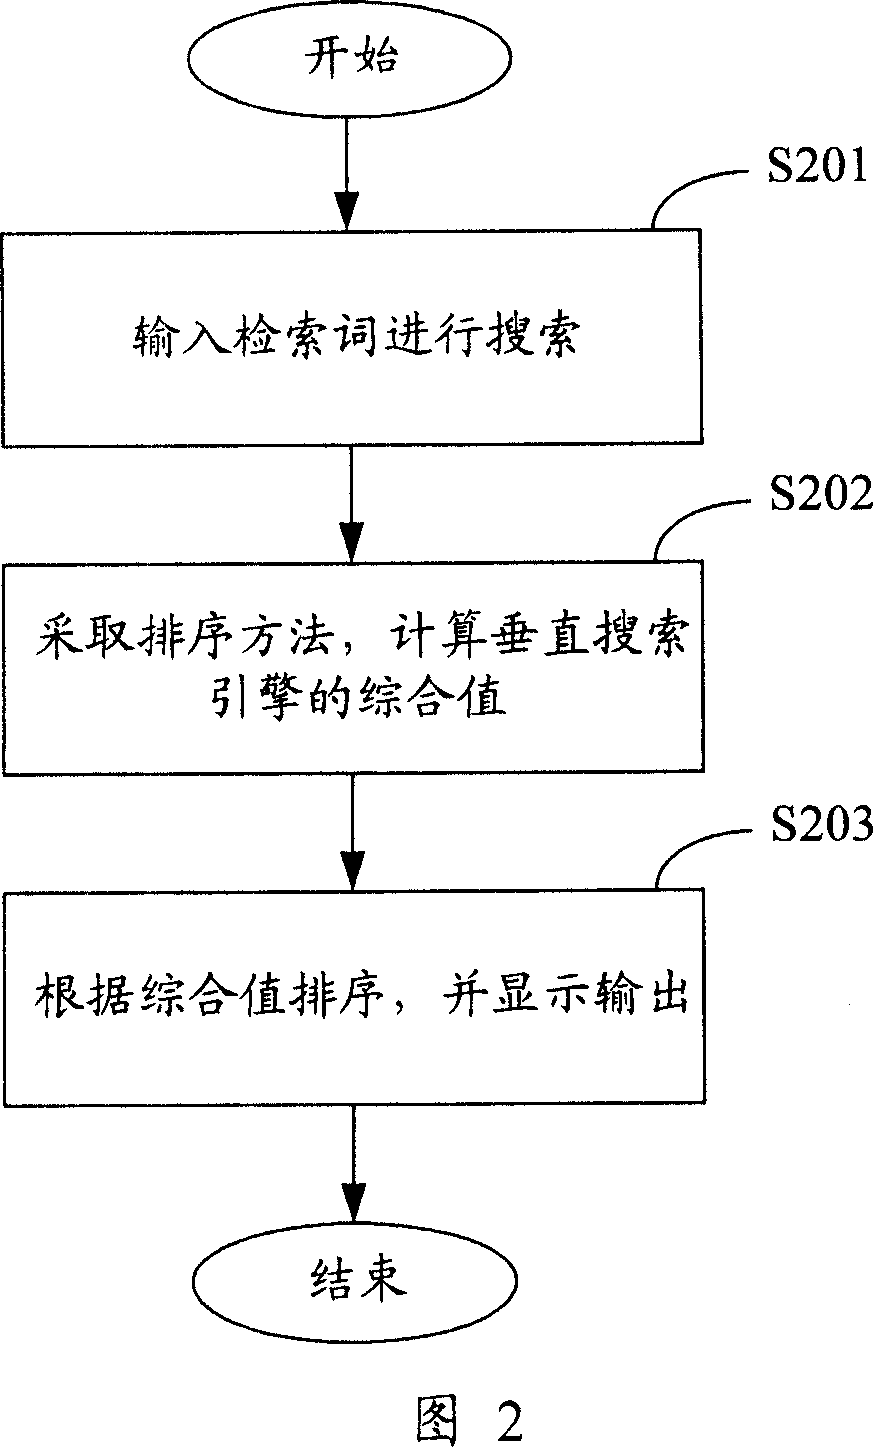 Integrative searching result sequencing system and method